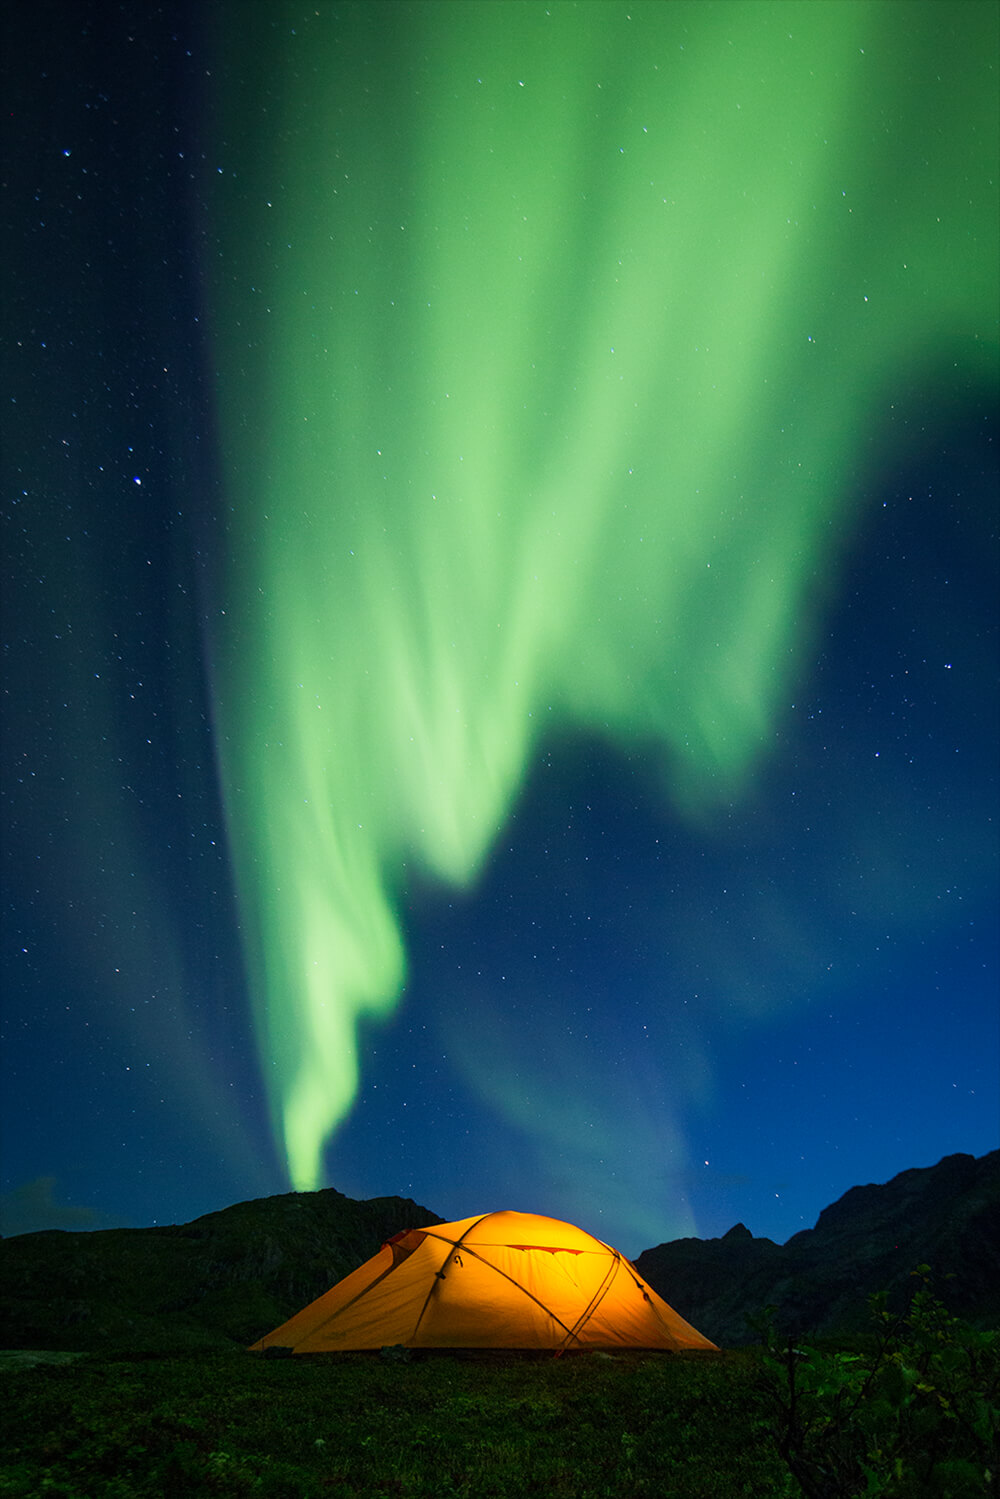 photo of a camping tent under the Northern Lights. Image by Neil Bloem